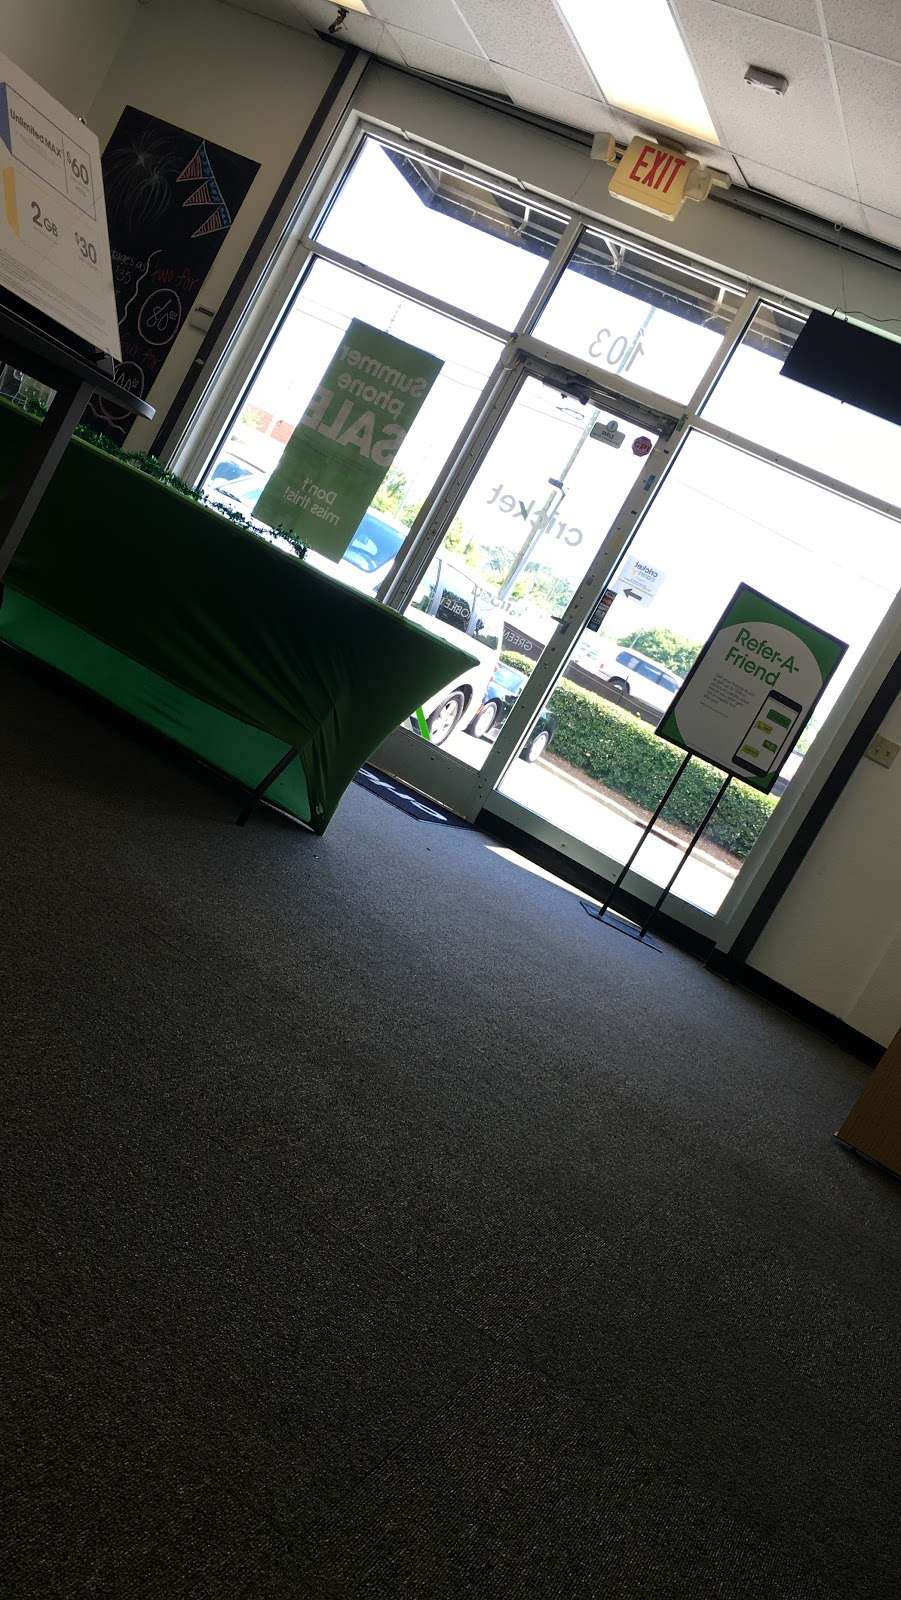 Cricket Wireless Authorized Retailer | 5009 Beatties Ford Rd Ste 103, Charlotte, NC 28216 | Phone: (704) 398-9272